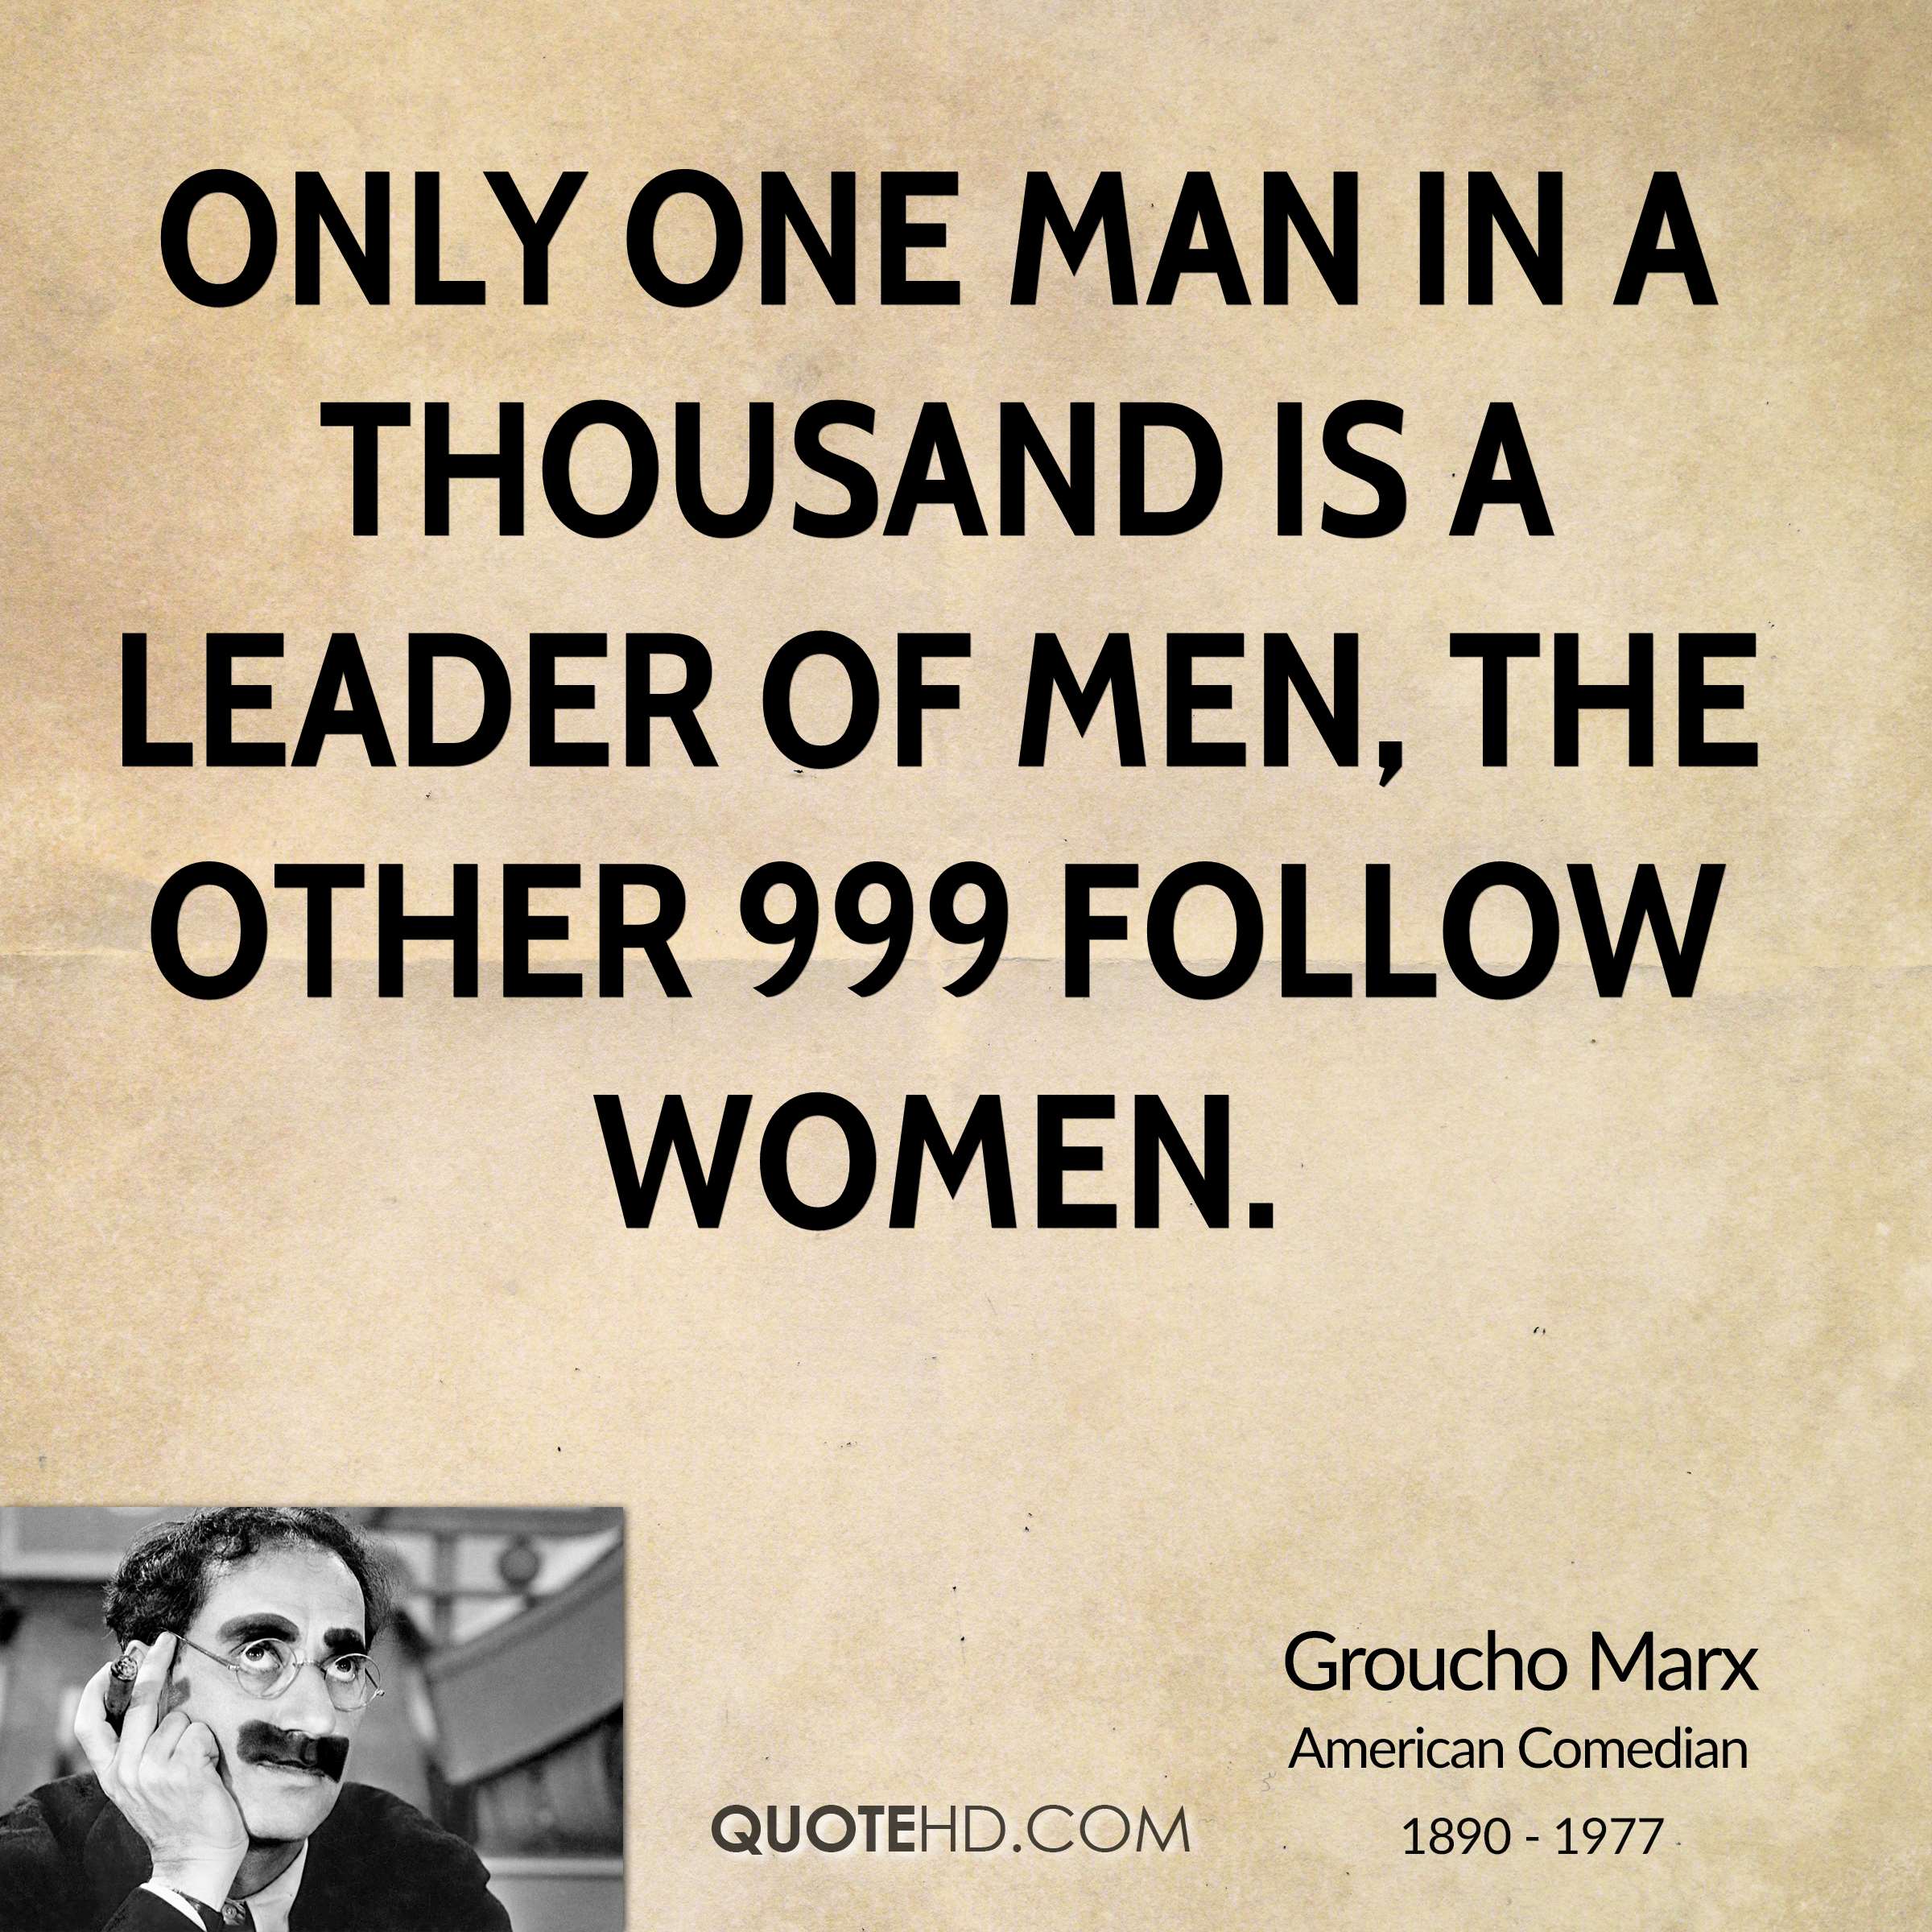 Only one man in a thousand is a leader of men — the other 999 follow women. Groucho Marx